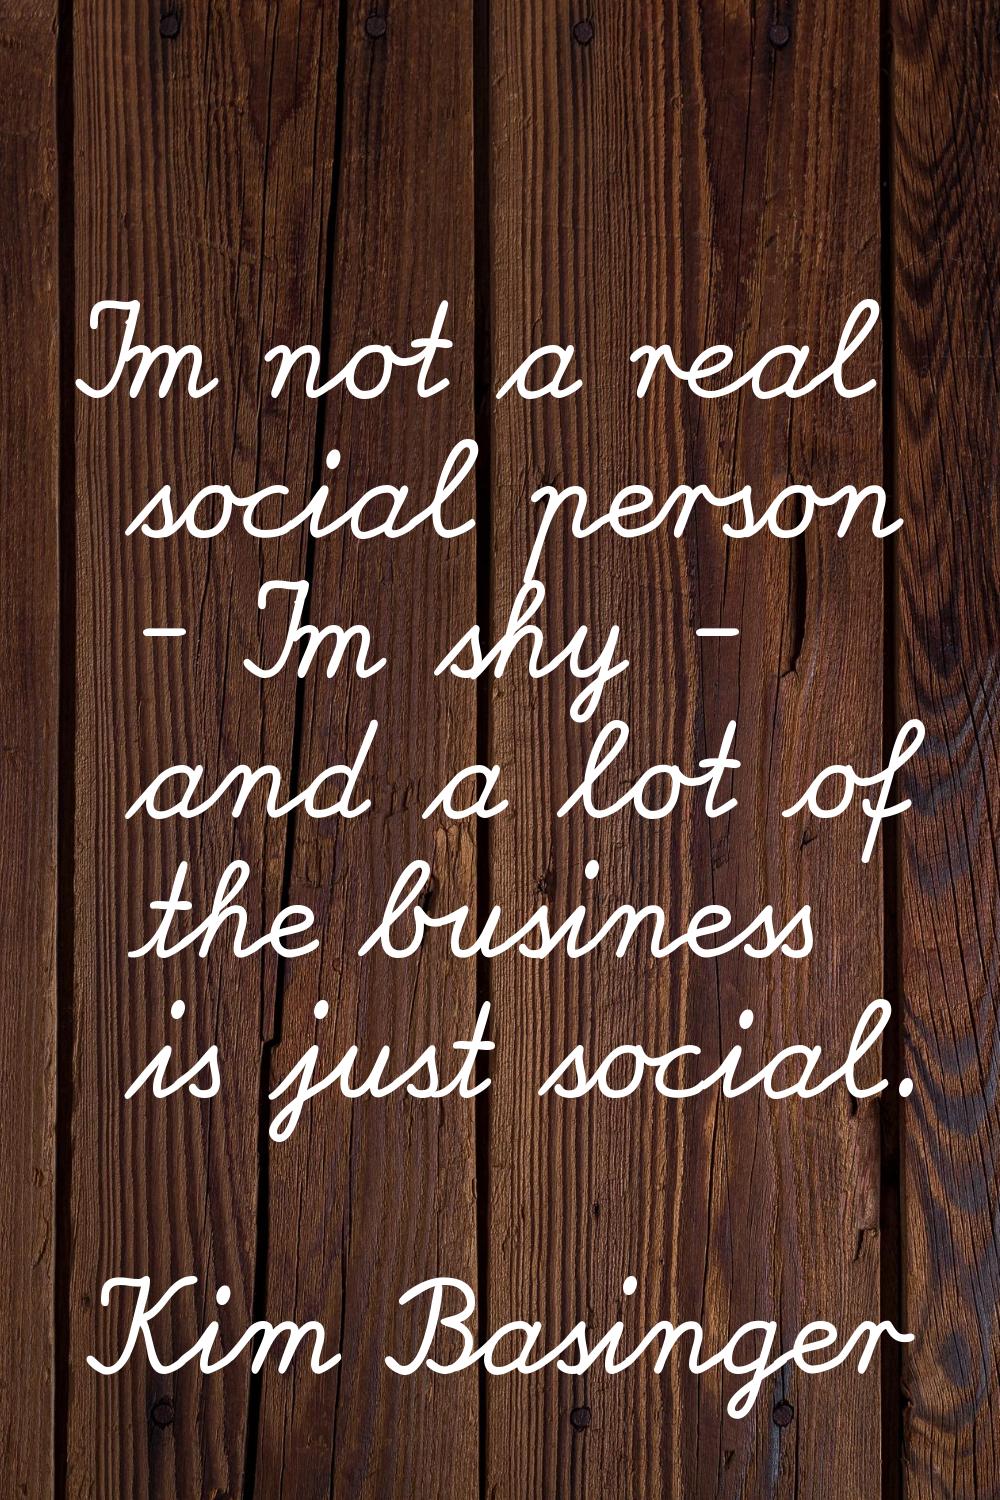 I'm not a real social person - I'm shy - and a lot of the business is just social.